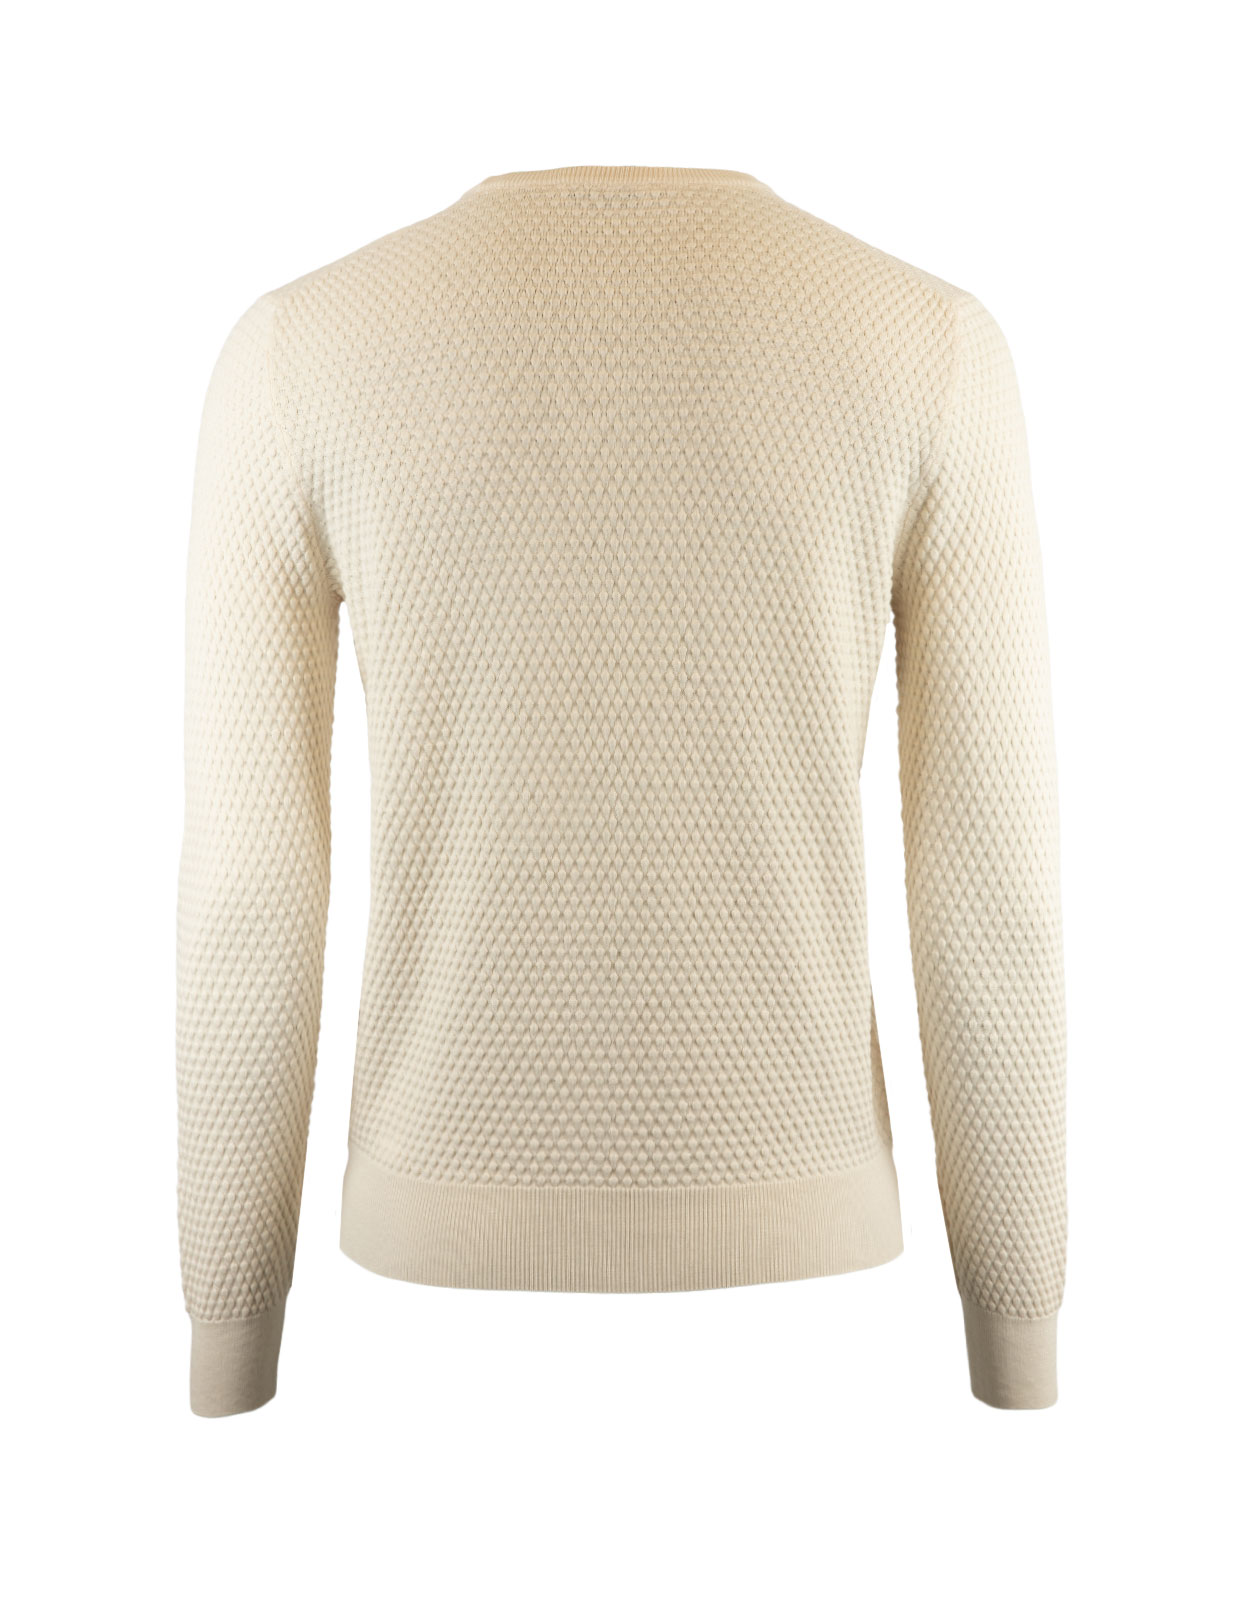 Crew Neck Sweater Structured Cotton Offwhite